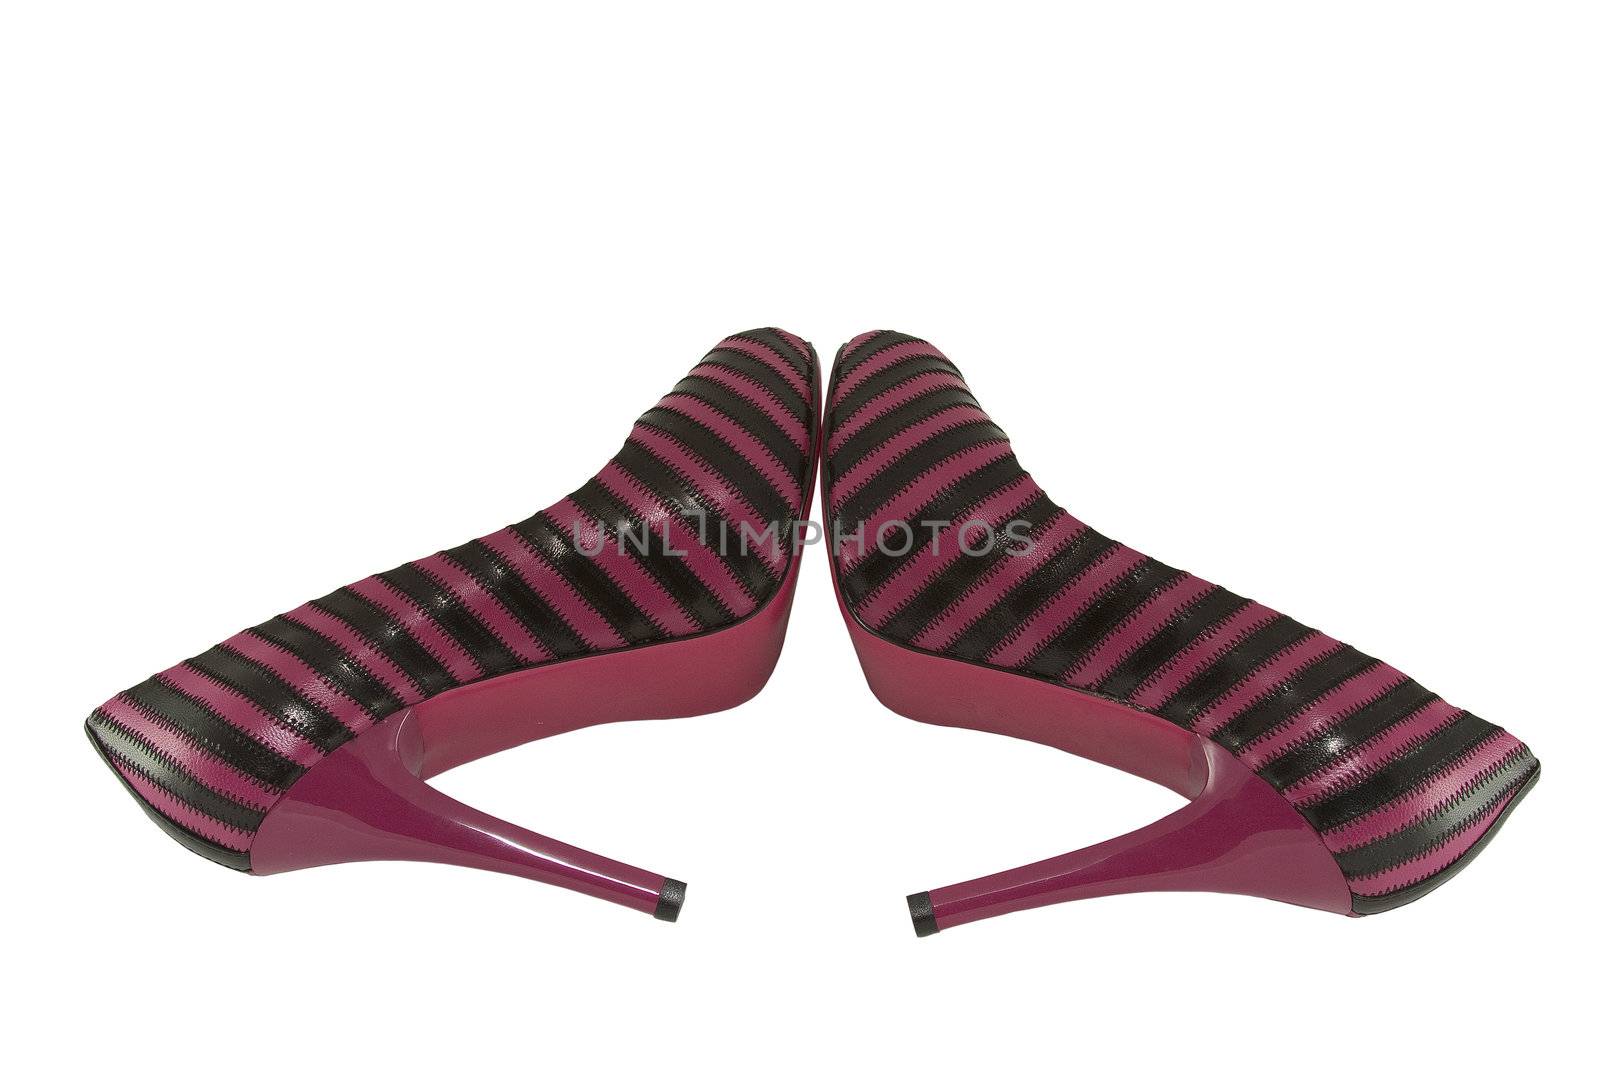 two shoe black and pink lie on background by Jaklin